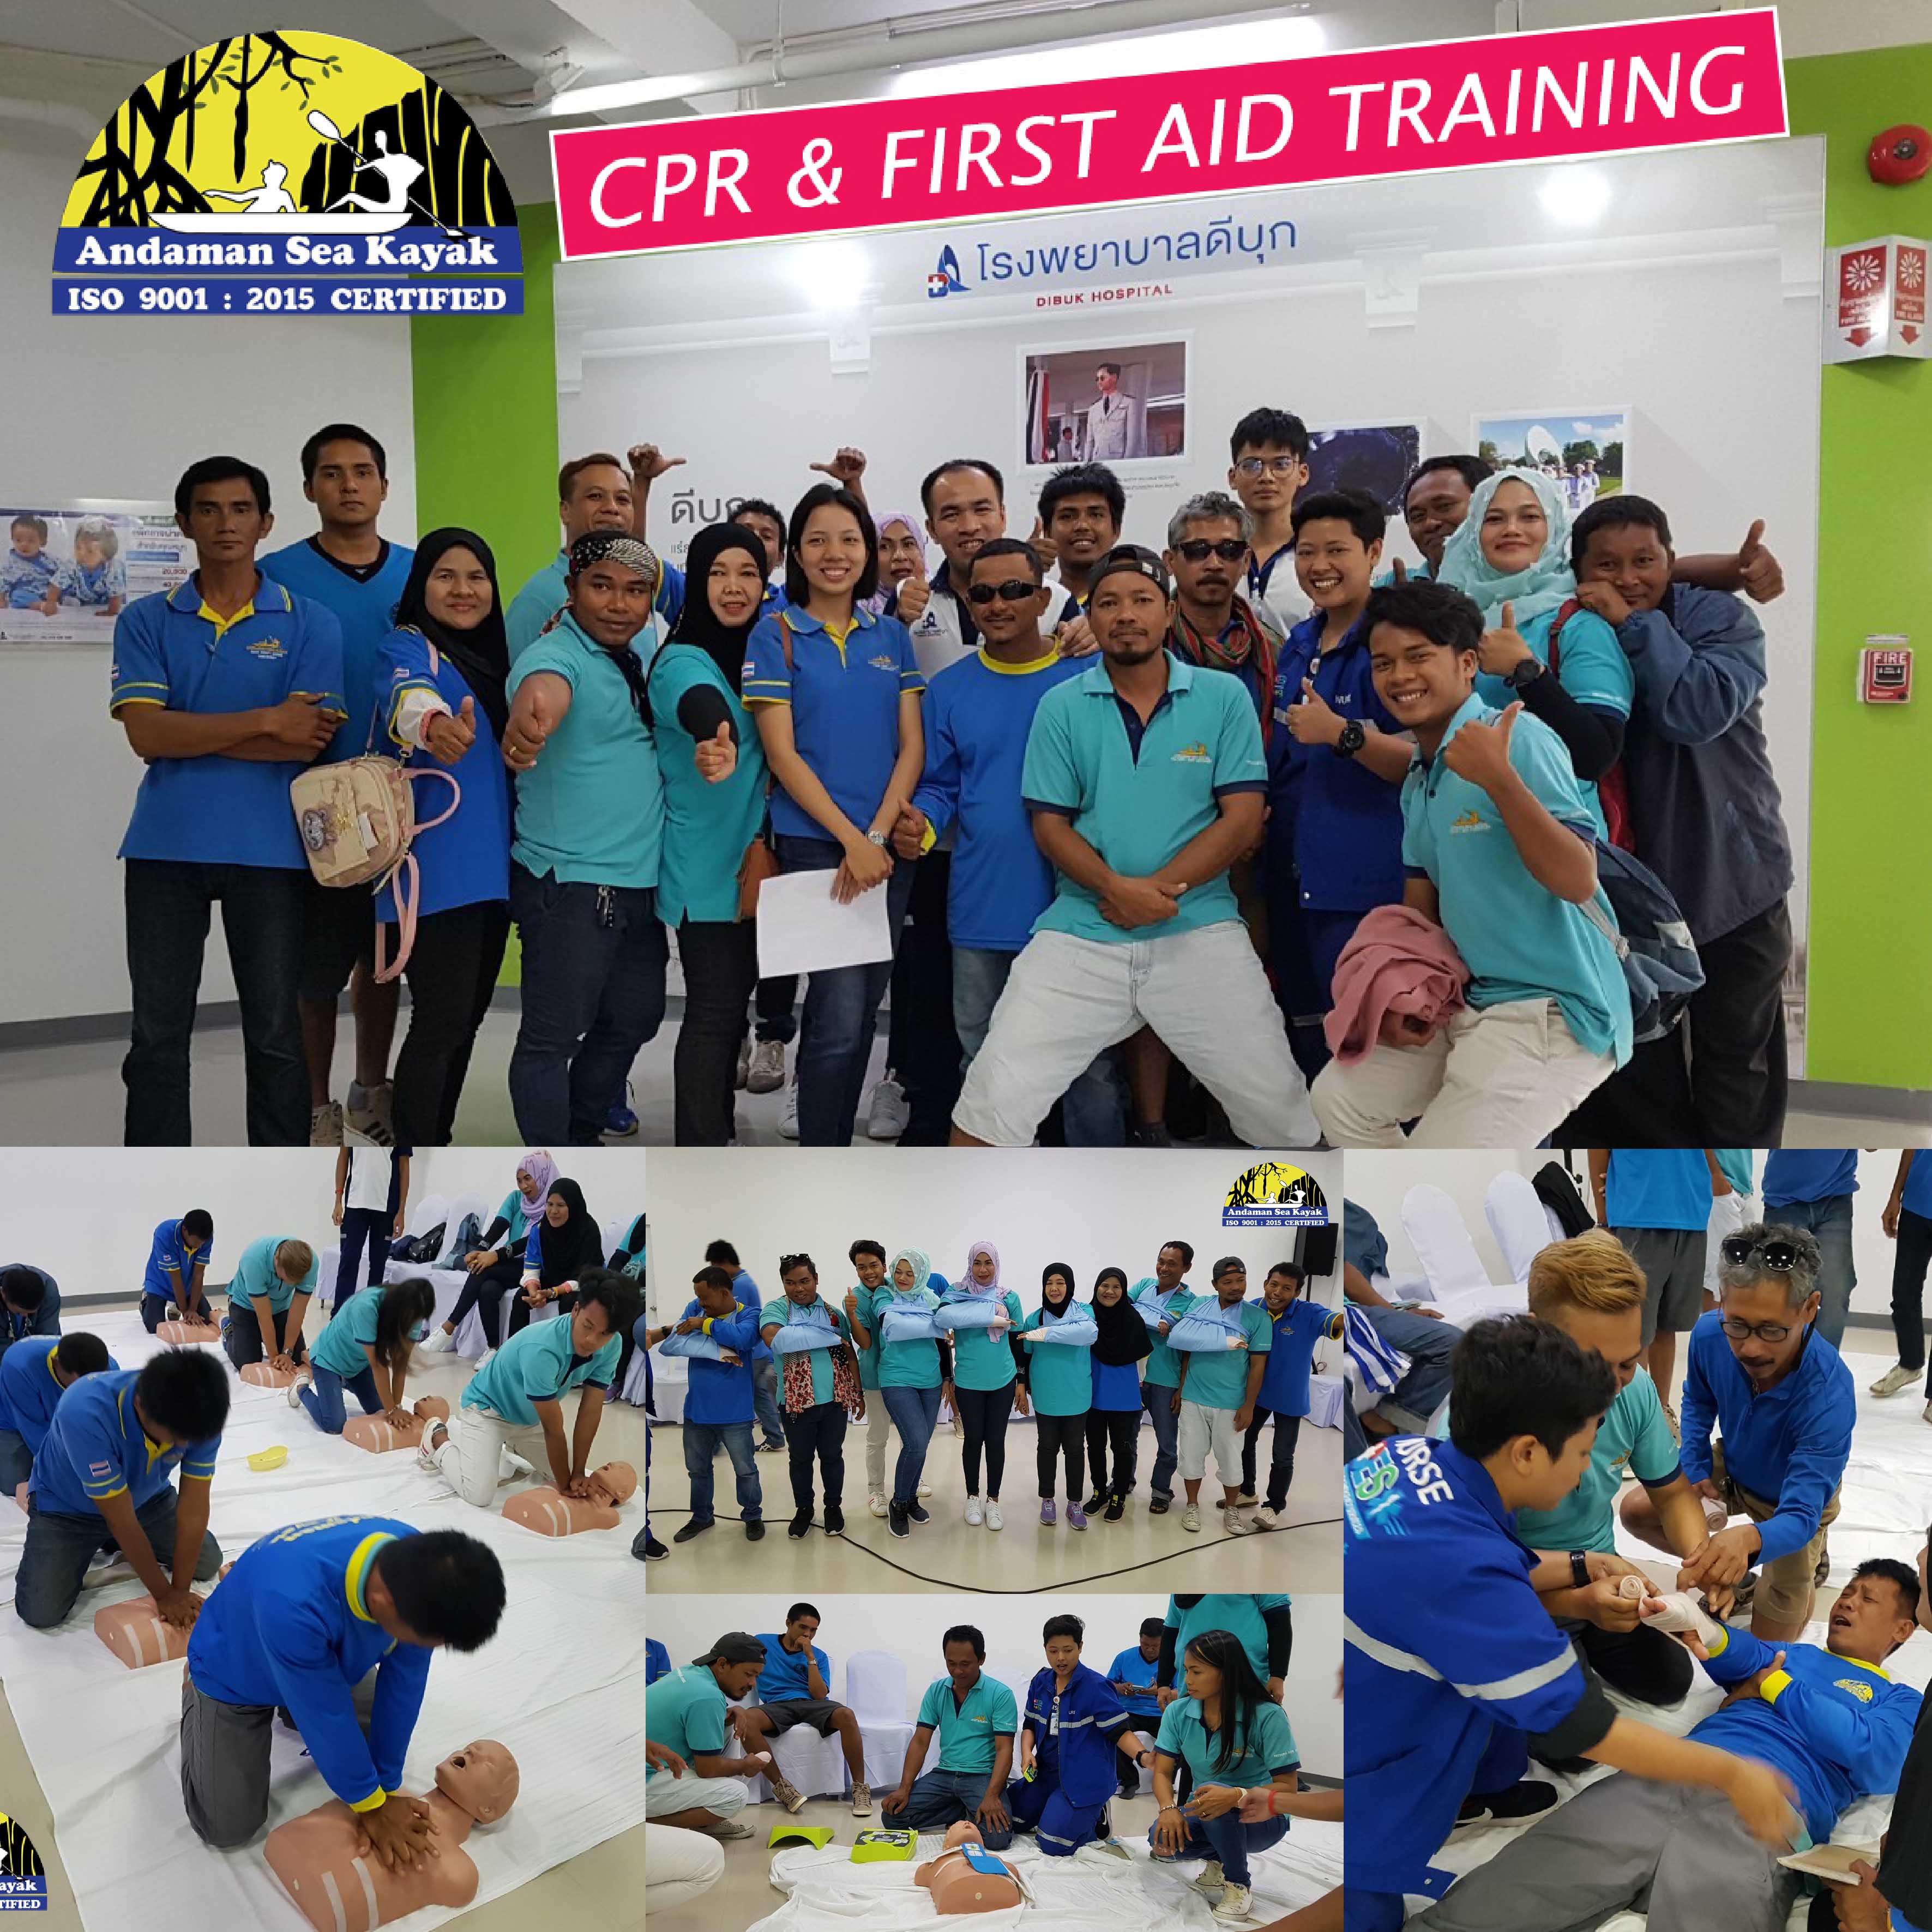 CPR and First Aid Training by Dibuk Hospital